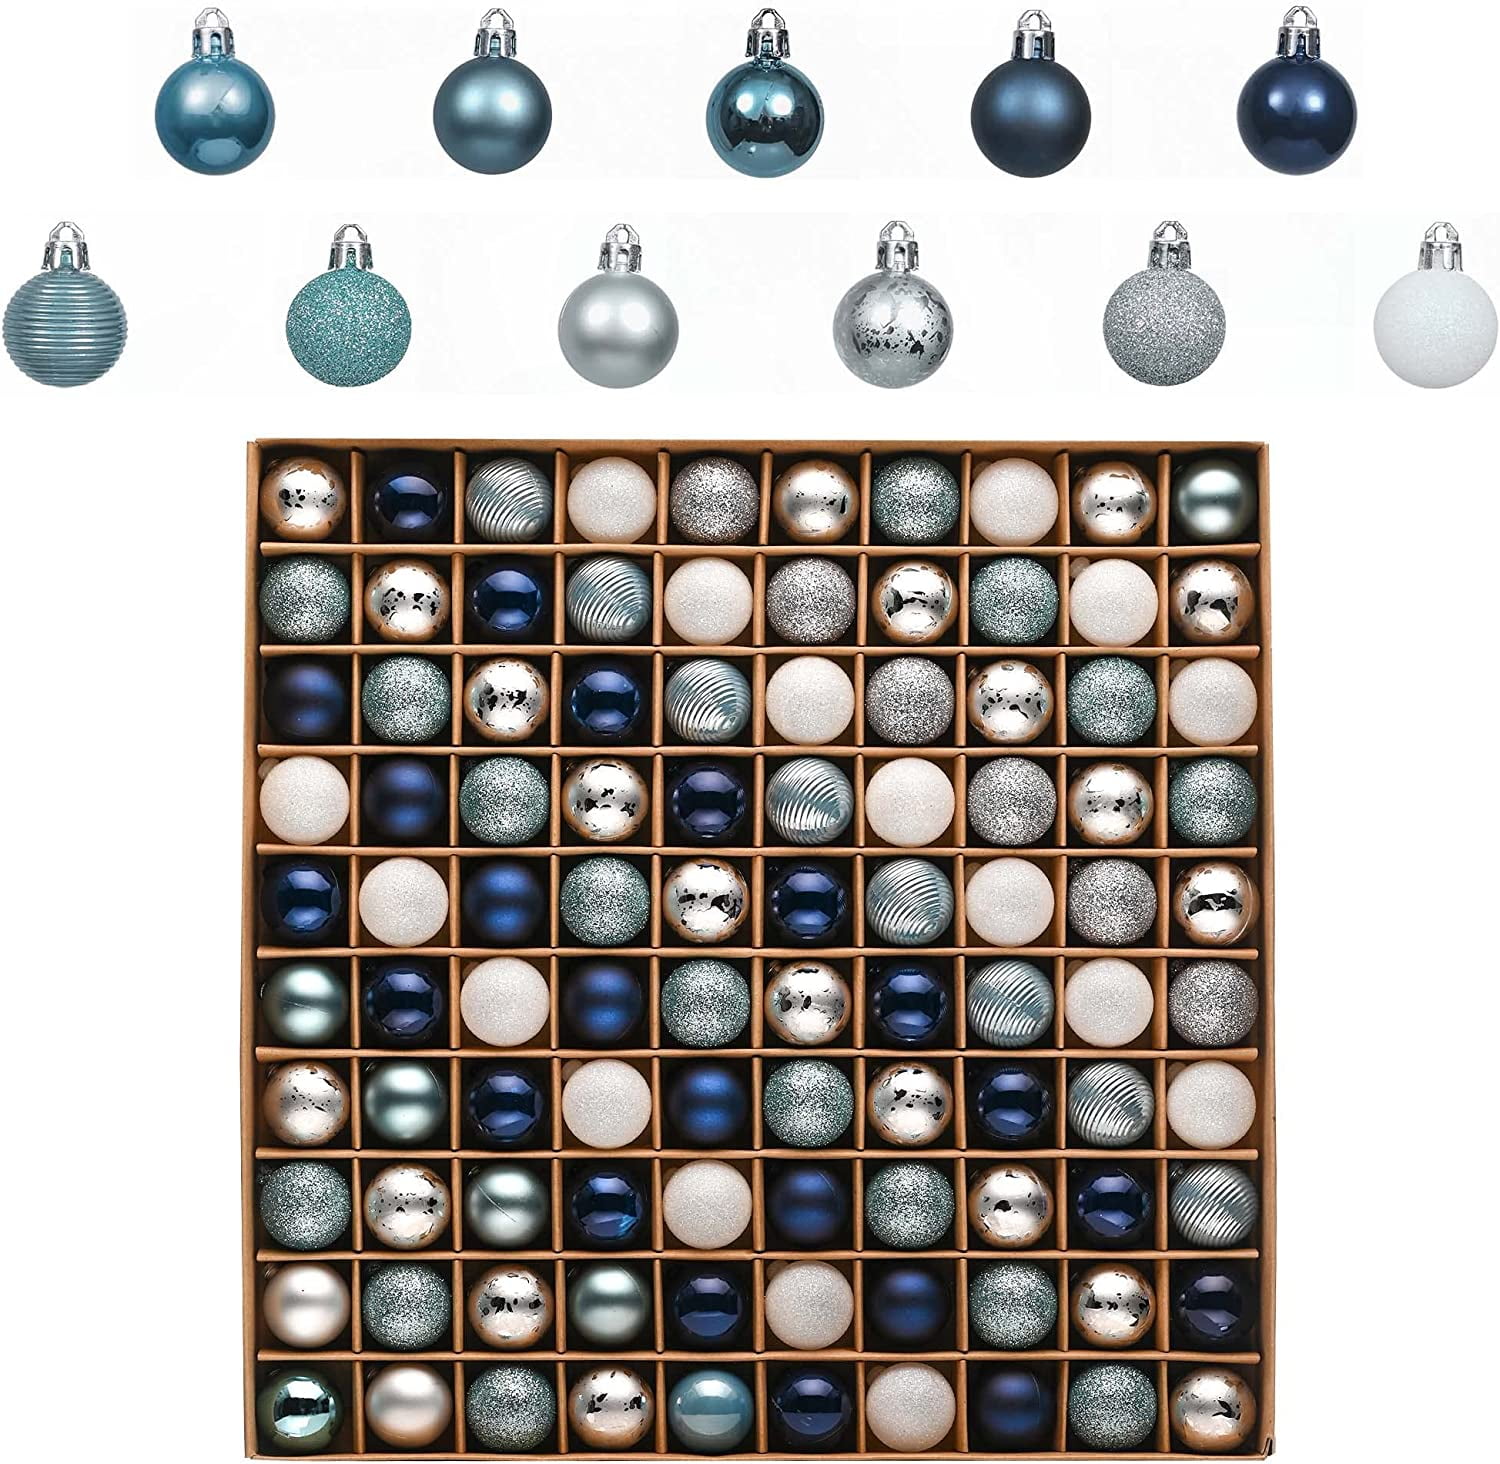 EG0101-0036 Valery Madelyn 70ct Winter Wishes Silver and Blue Christmas  Ball Ornaments Decor, Shatterproof Assorted Christmas Tree Ornaments